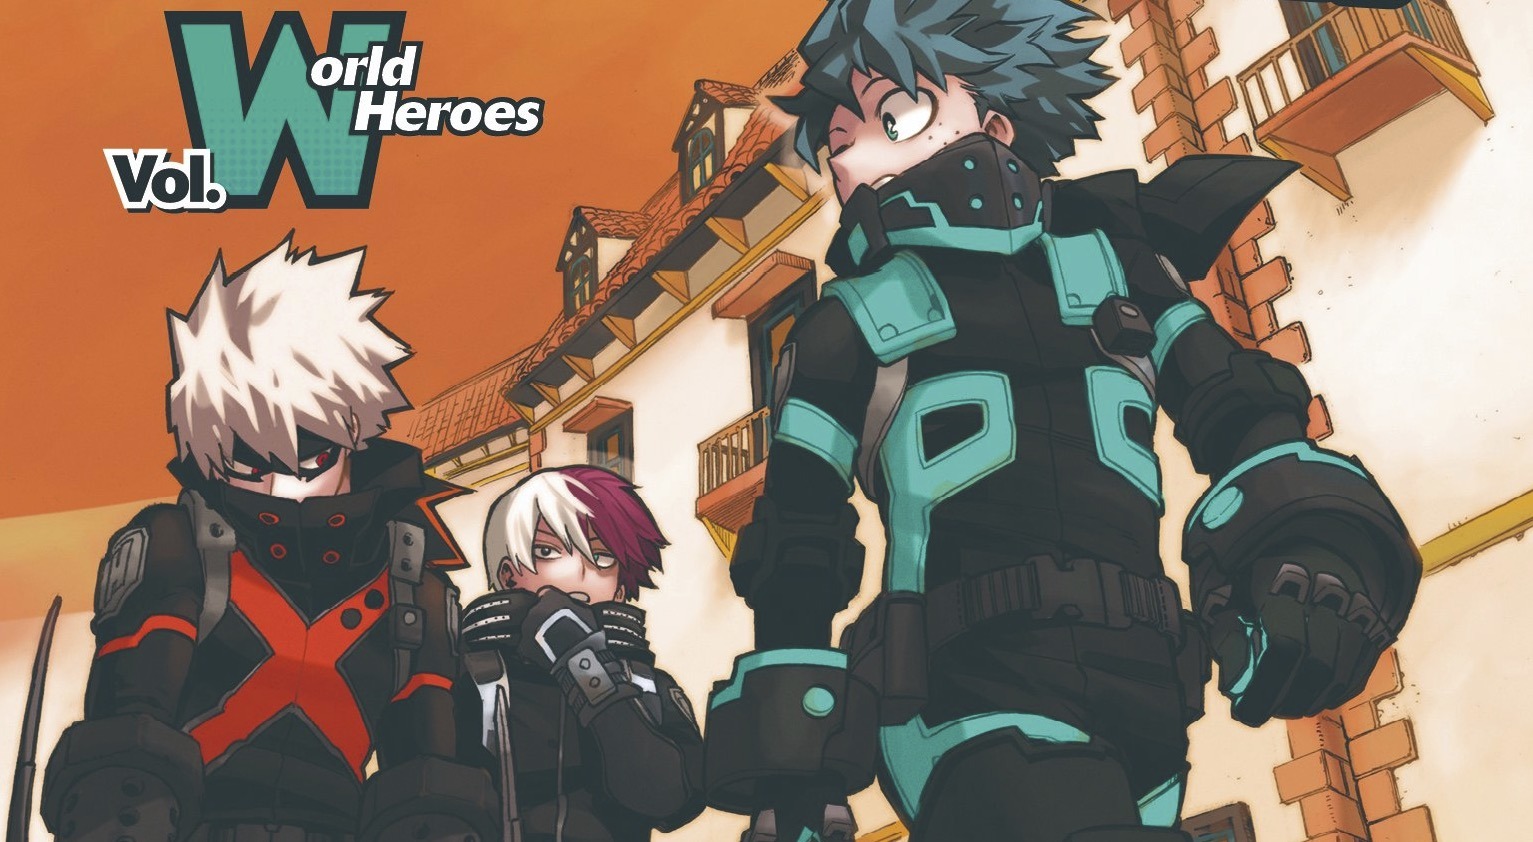 Boku no hero Academia the movie 3:world Heroes'Mission' in 2023